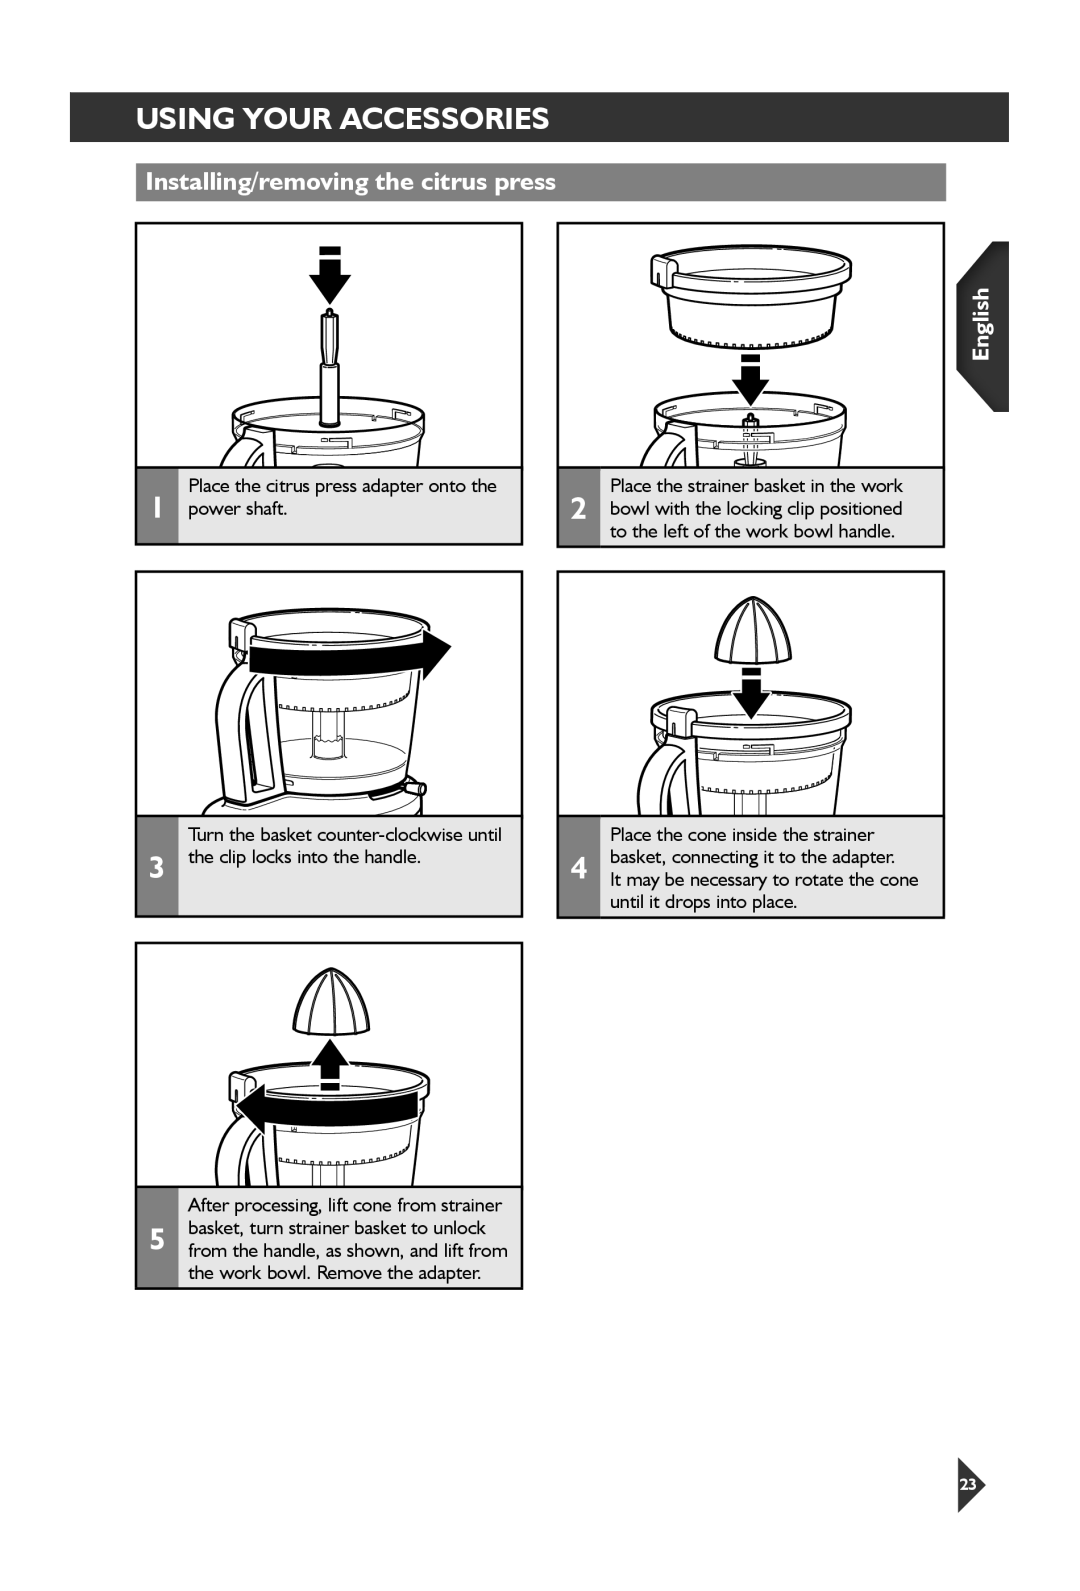 KitchenAid 5KFP1644 manual Installing/removing the citrus press, Using Your Accessories, English 